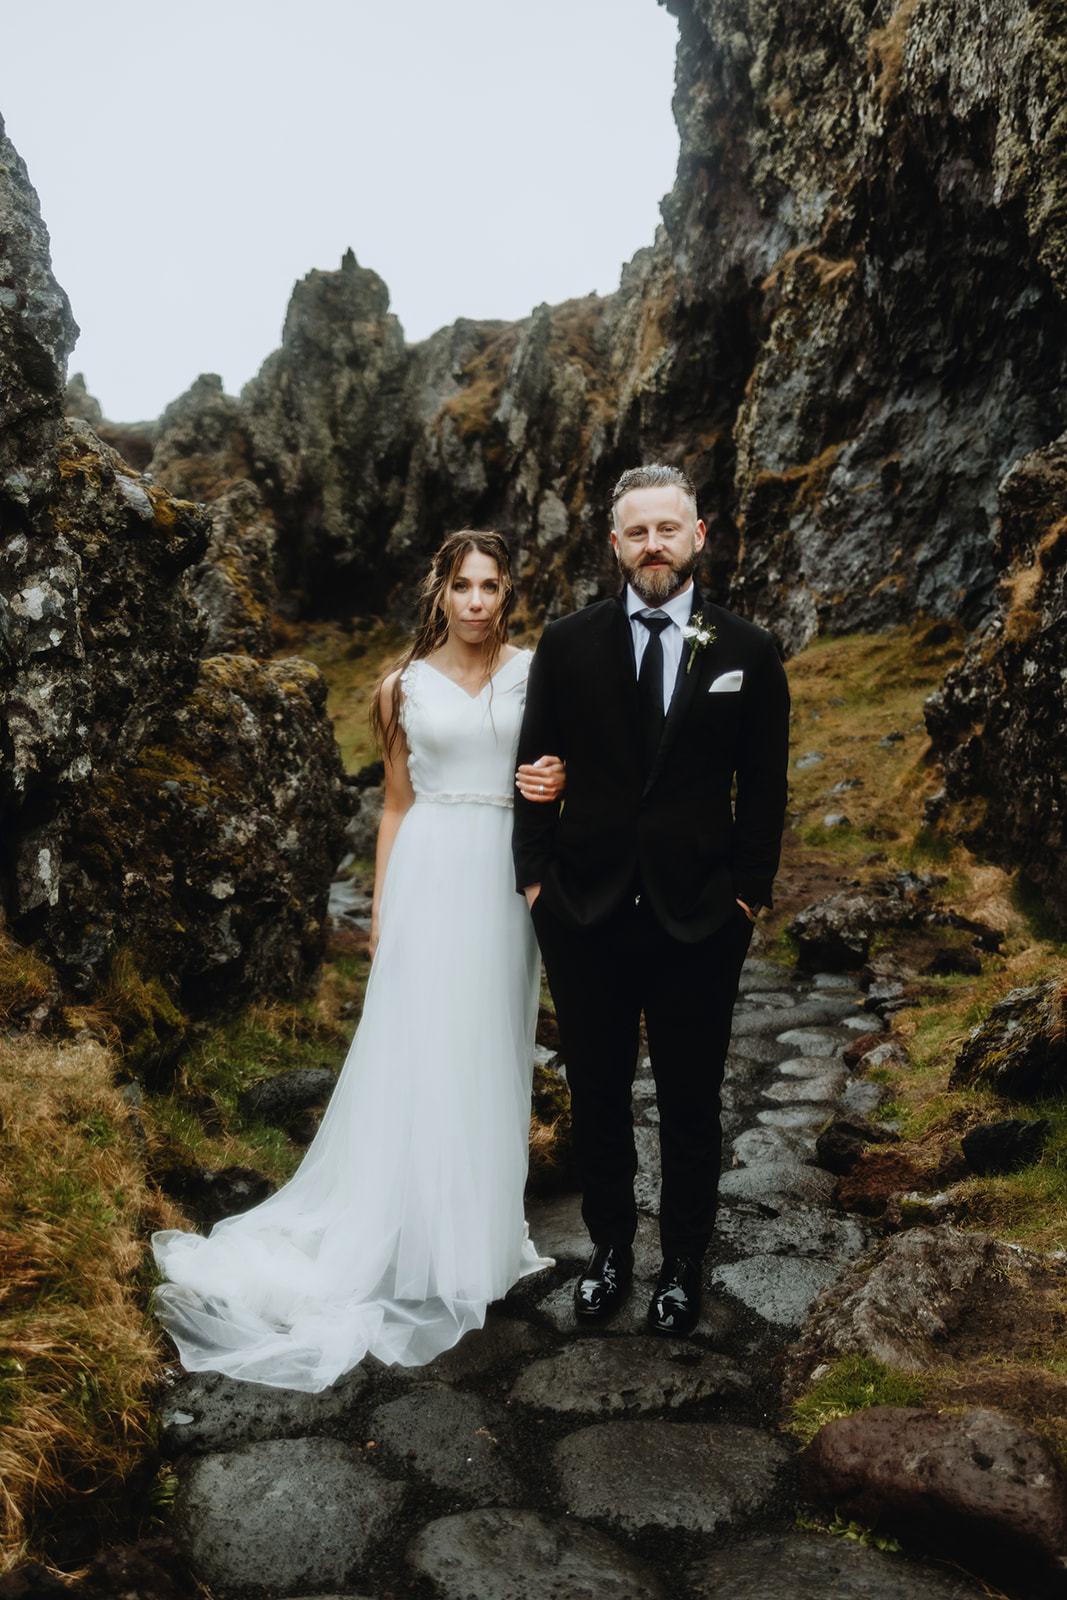 Married couple portrait in the rain in Iceland